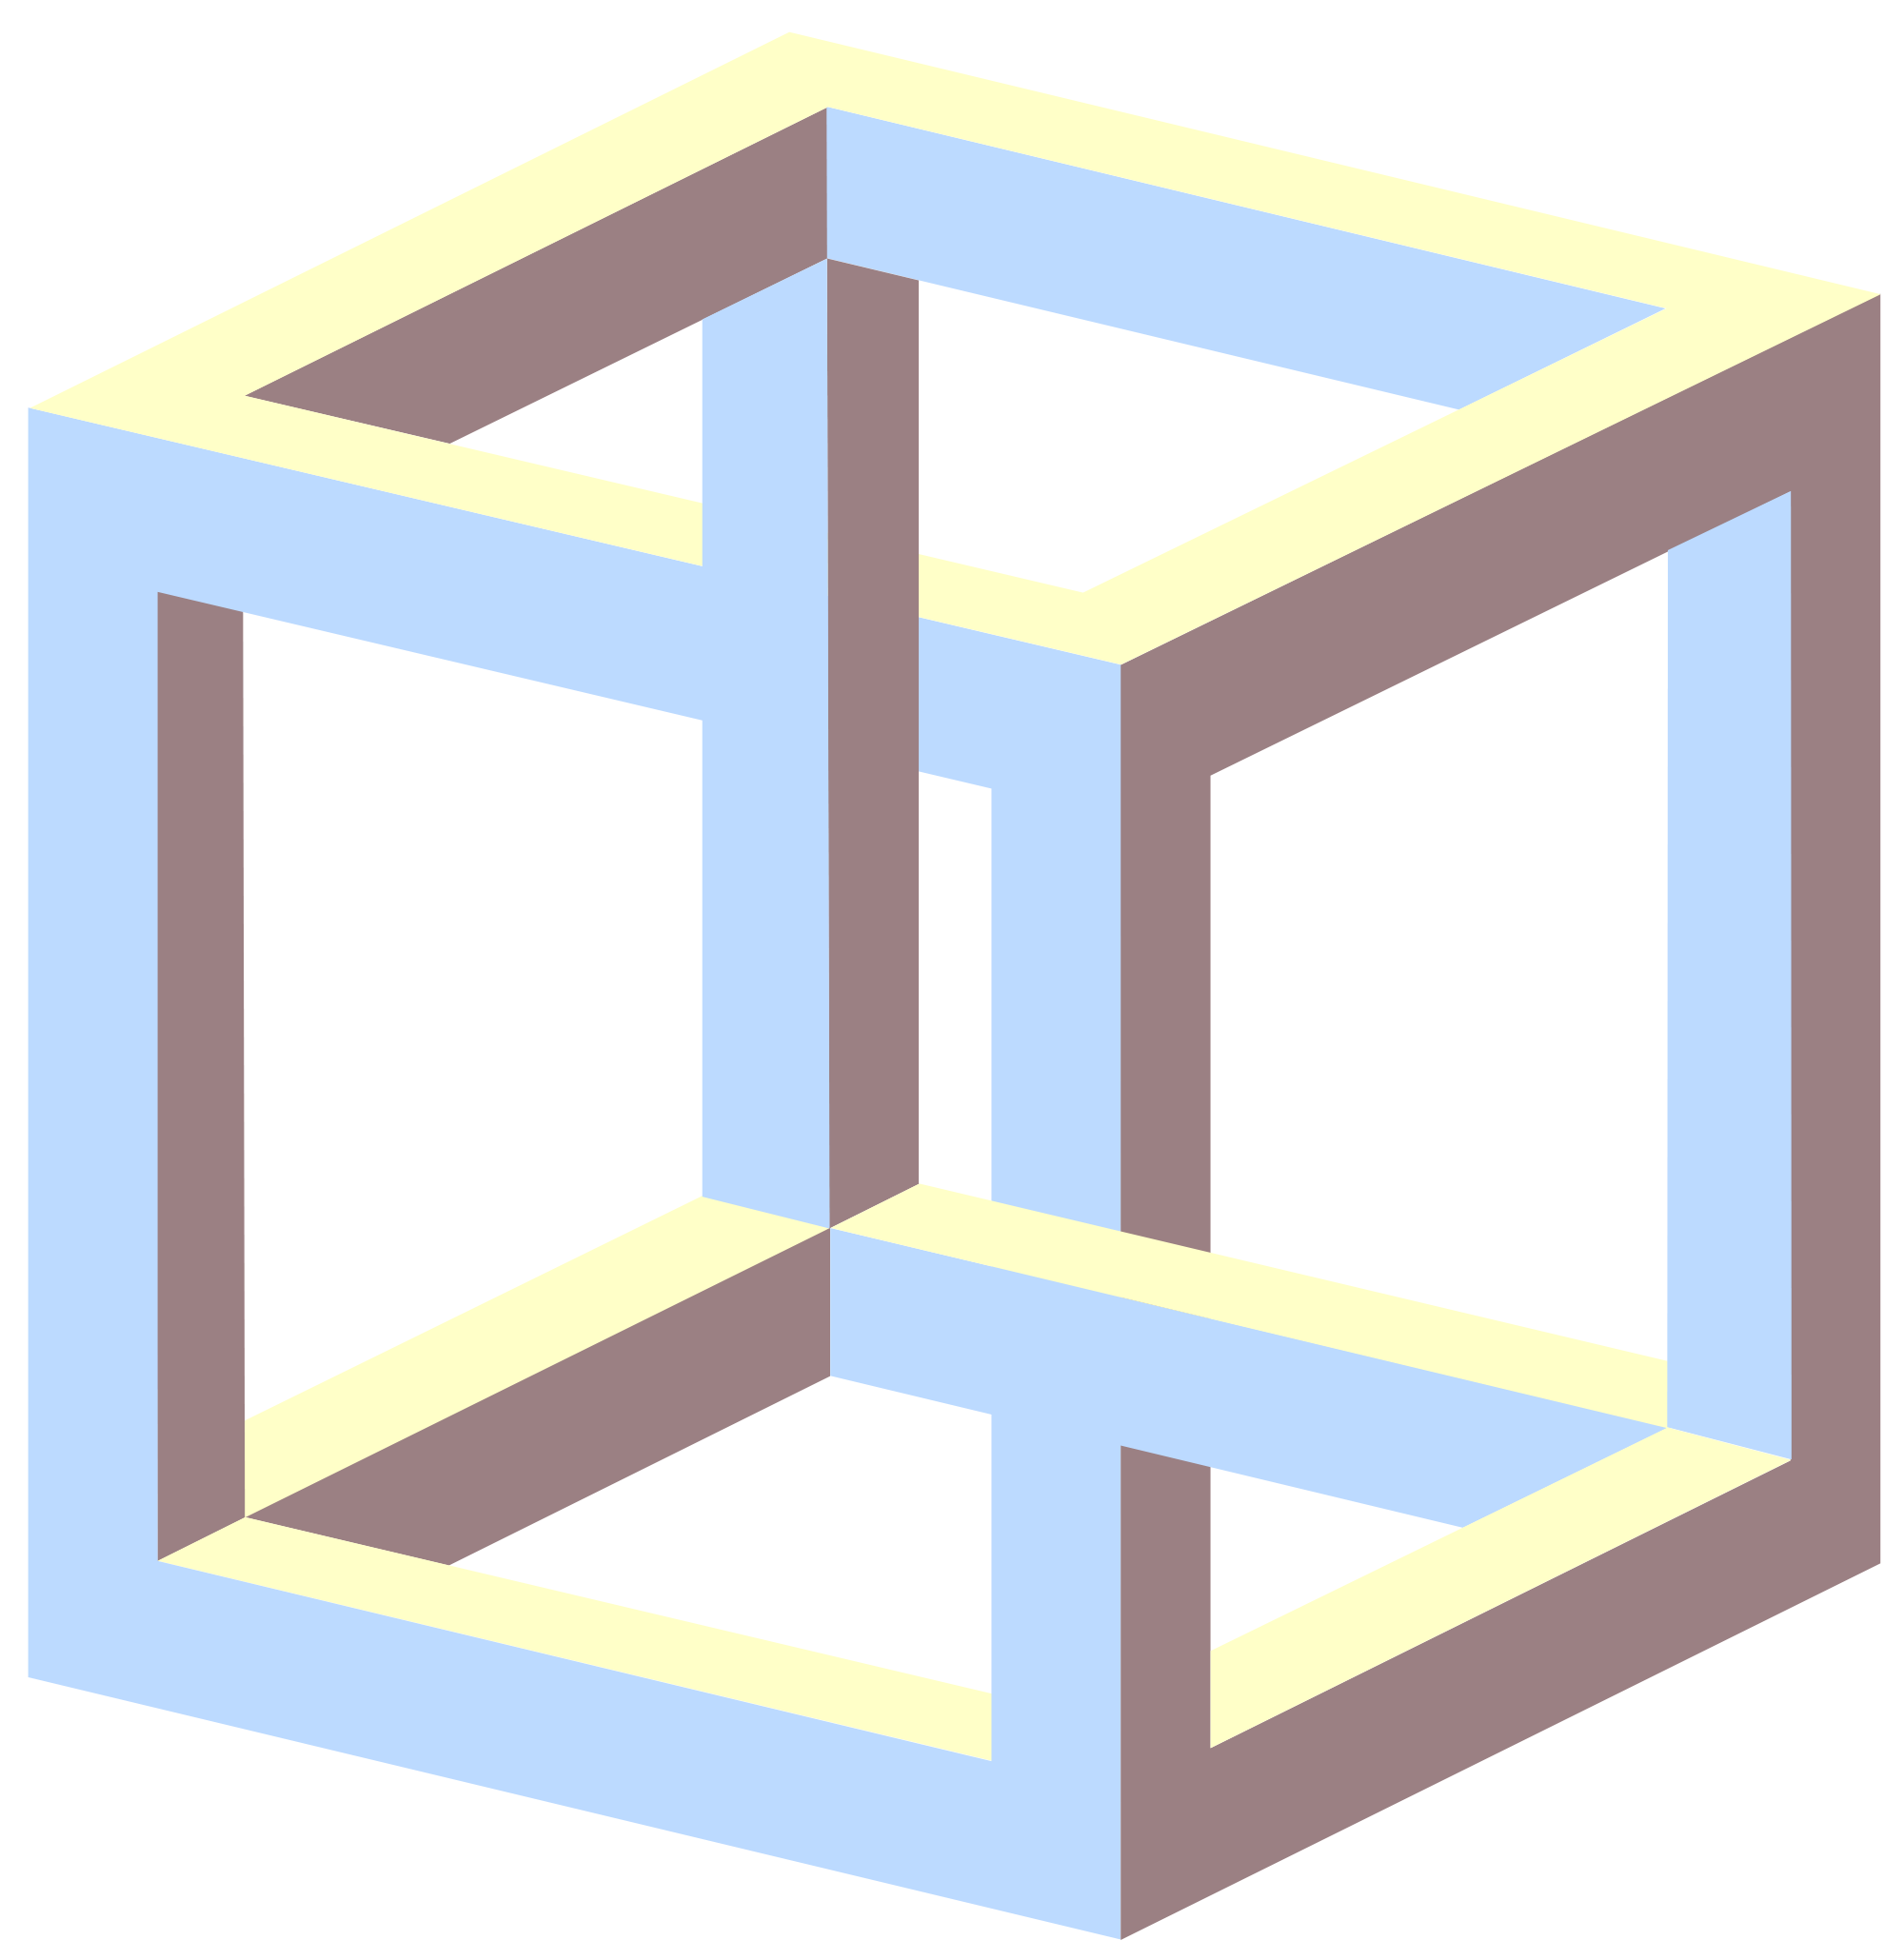 Impossible object - Wikipedia, the free encyclopedia